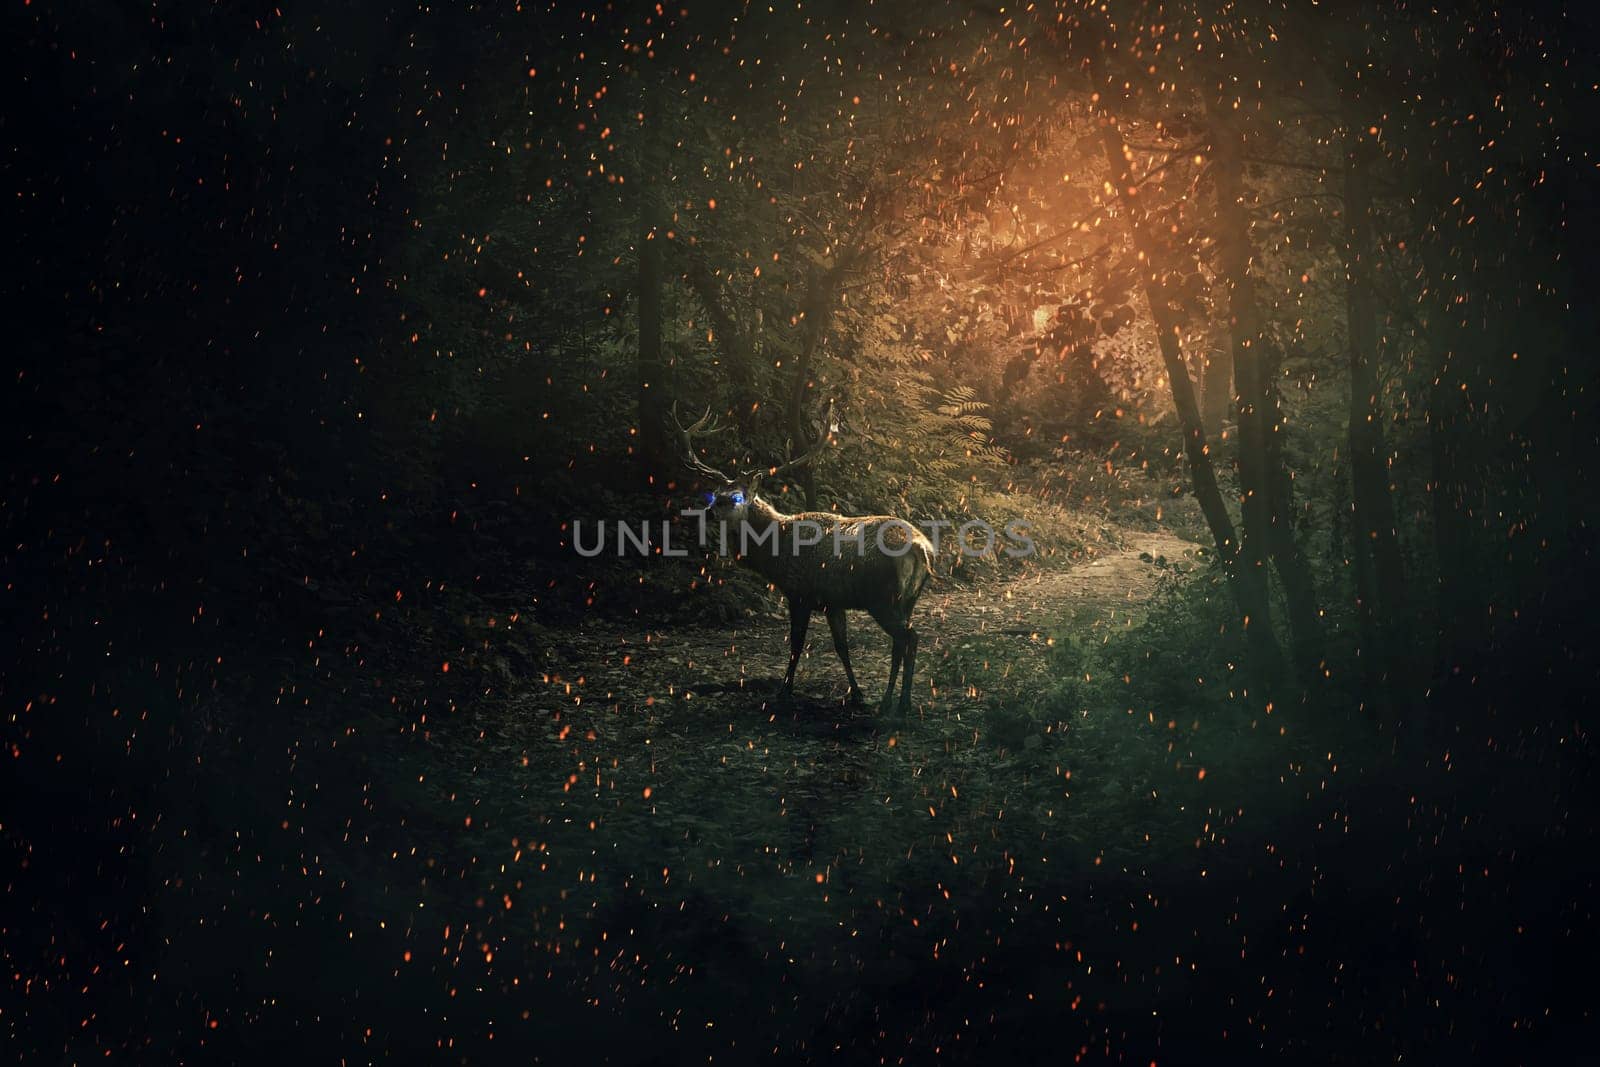 Majestic deer with blue glowing eyes and long horns guard the dark forest with a lot of fireflies and sparkles. Mystic wild scene screen saver.